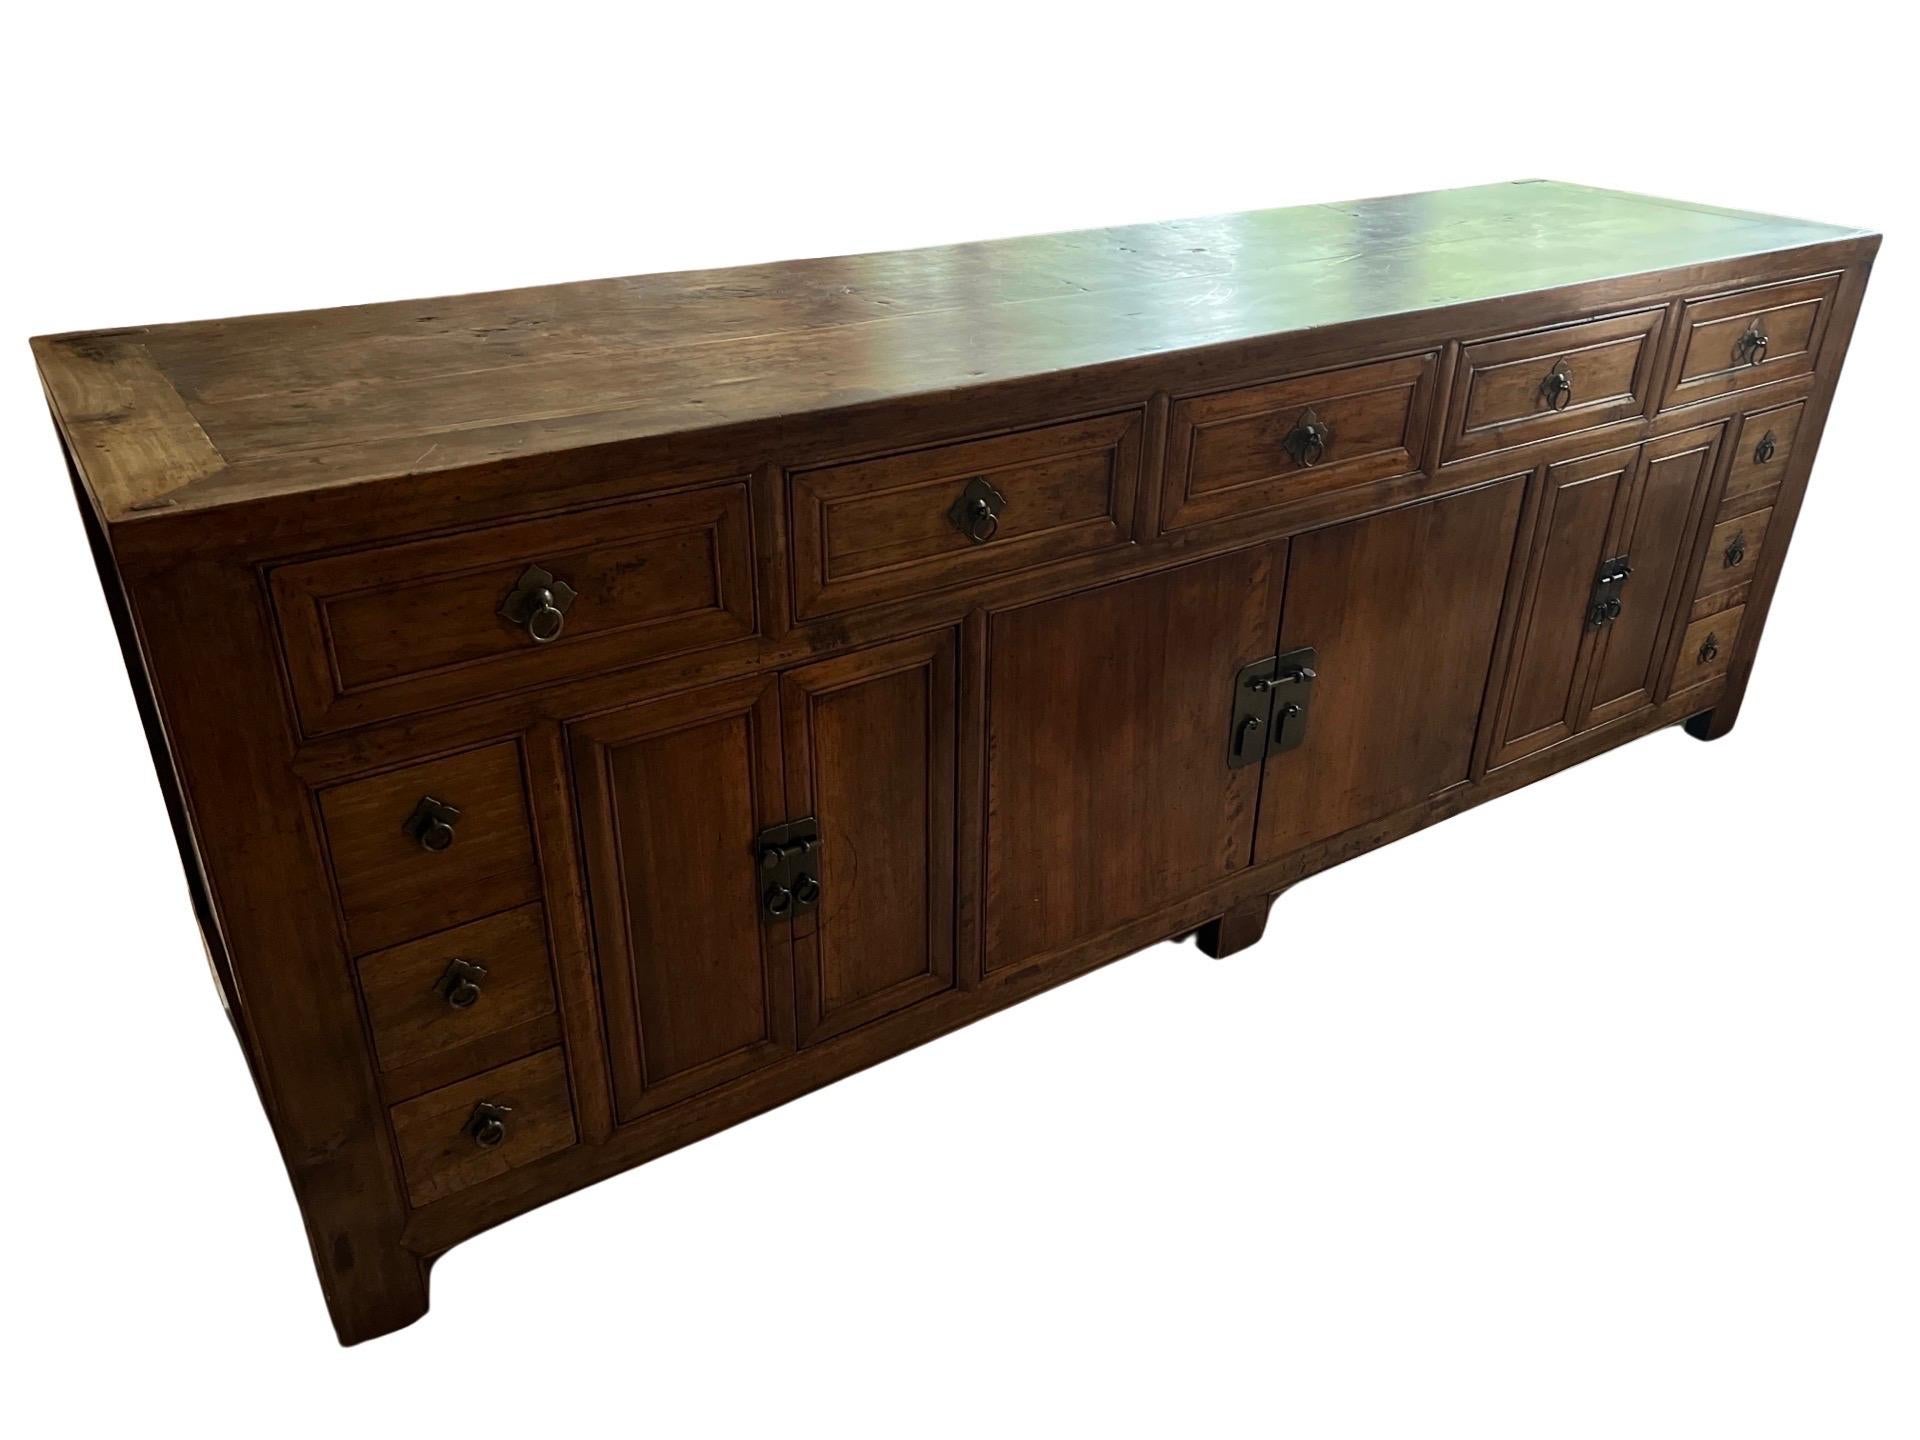 19th C. Monumental & Important Qing Dynasty Chinese Double Sided Sideboard For Sale 9